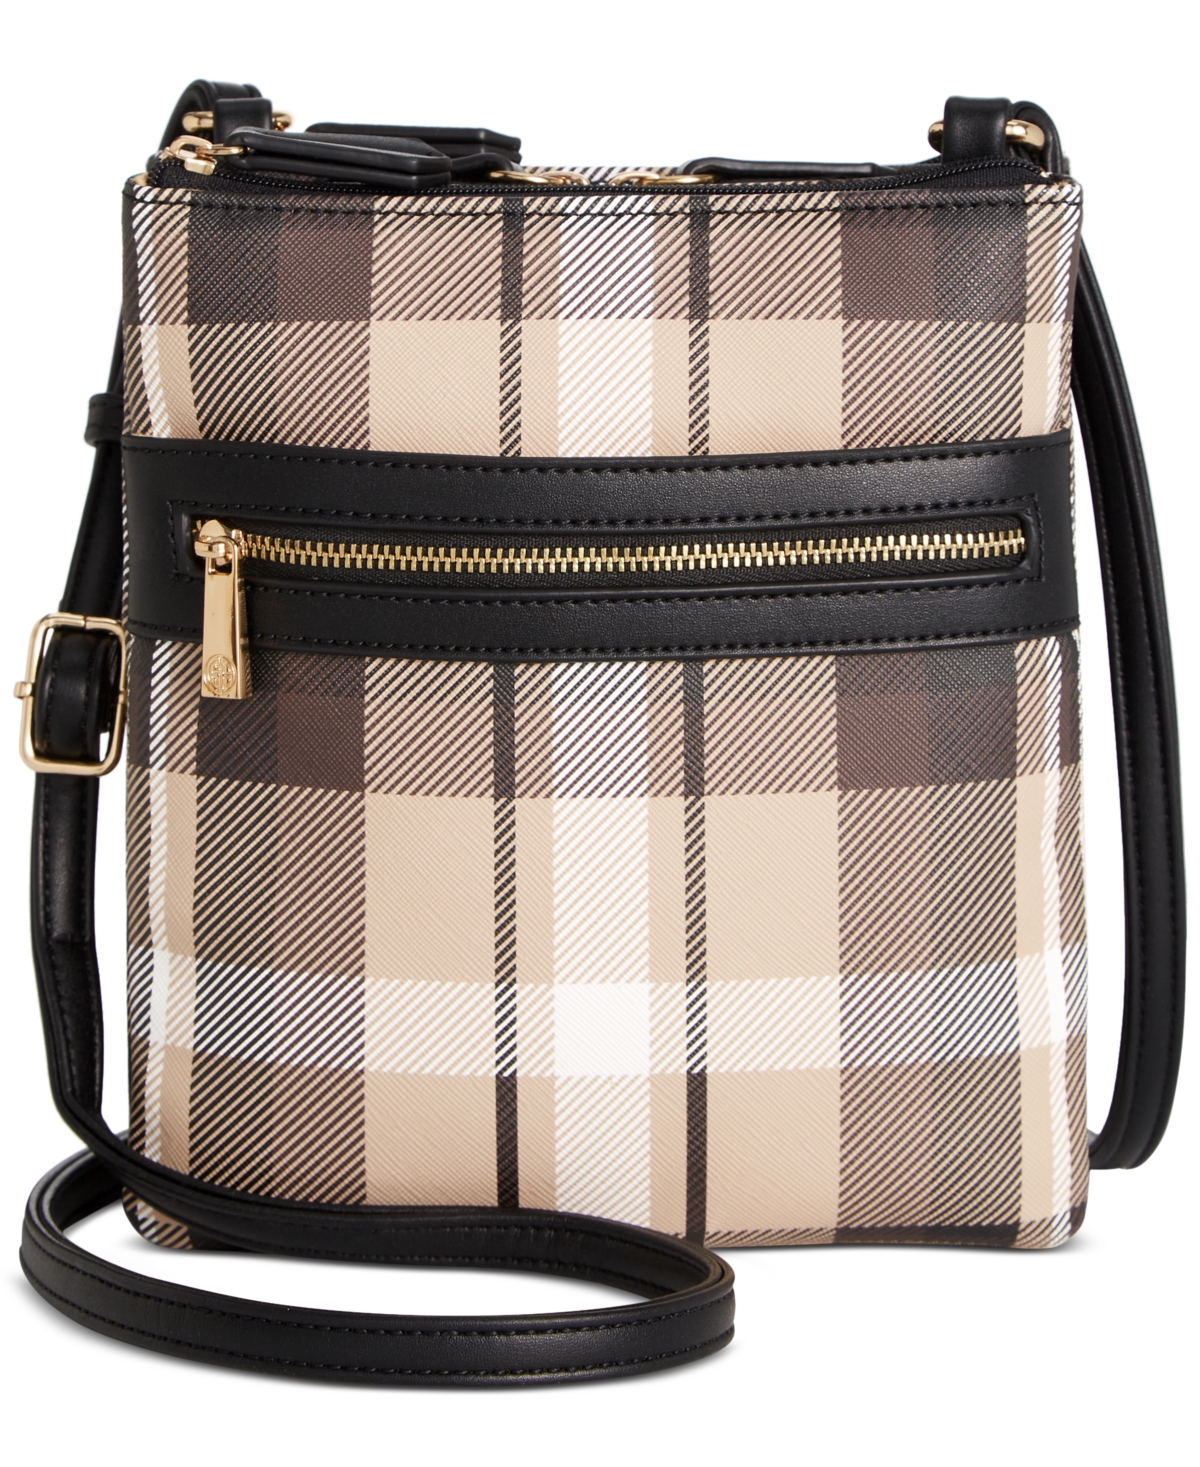 Vertical Plaid Small Dasher Crossbody, Created for Macy's - Oatmeal Plaid